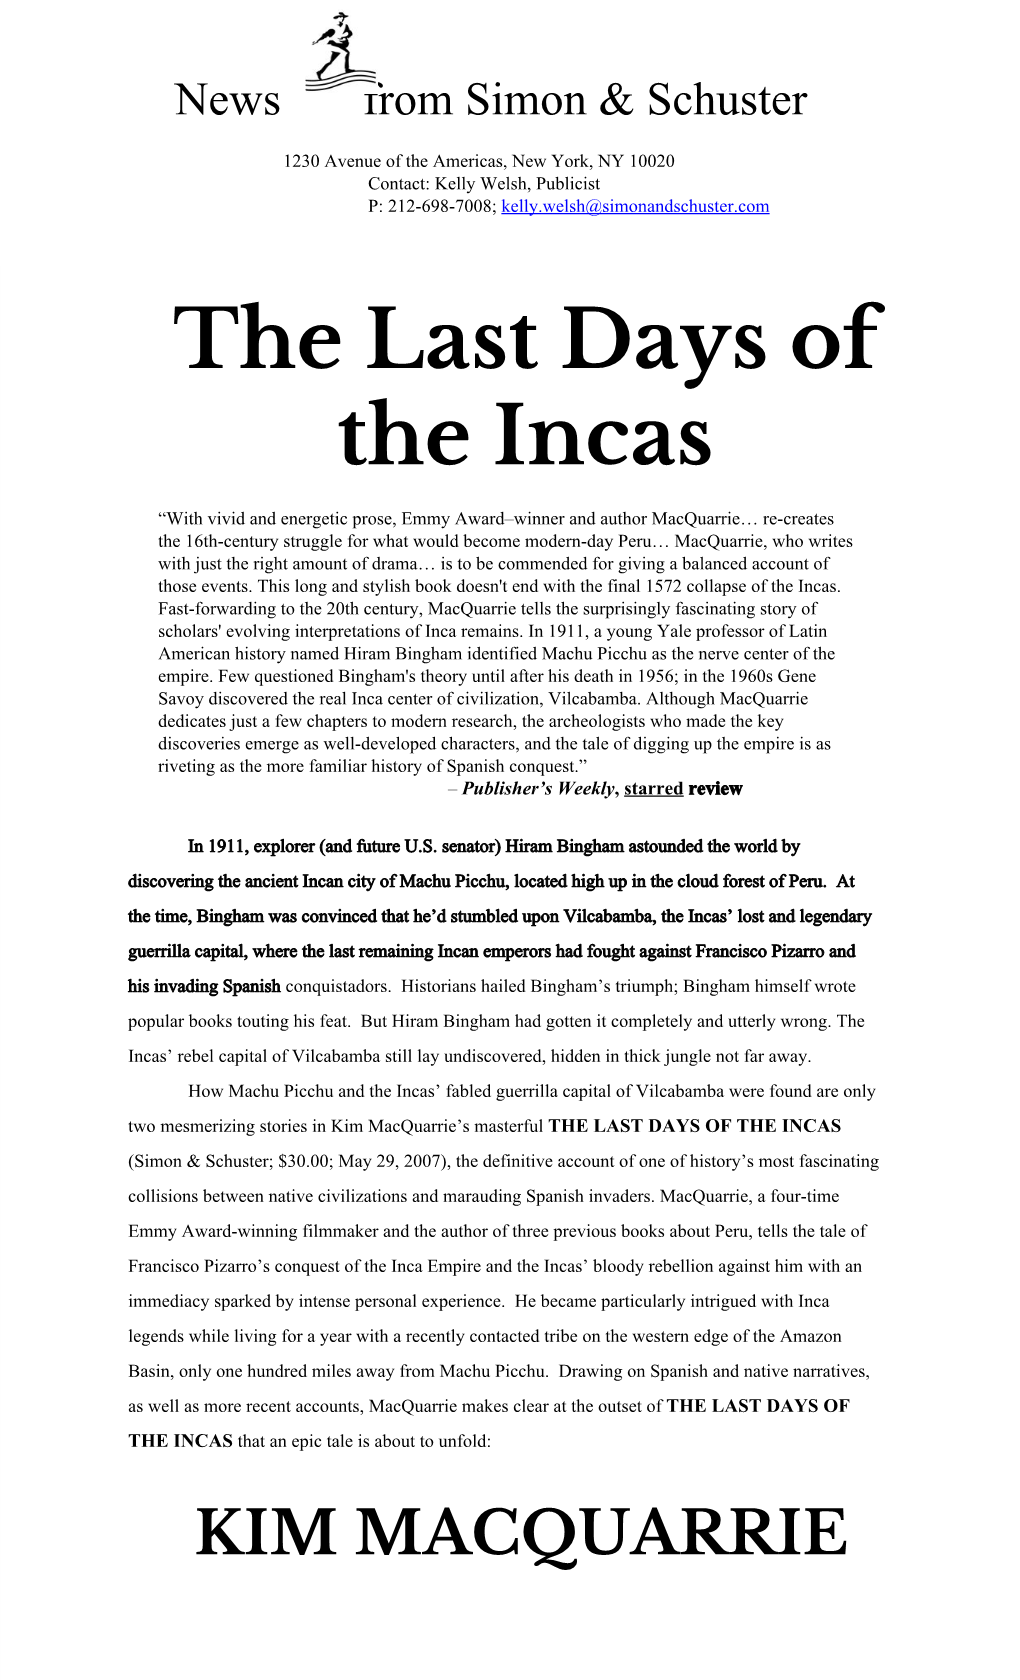 Press Kit for the Last Days of the Incas